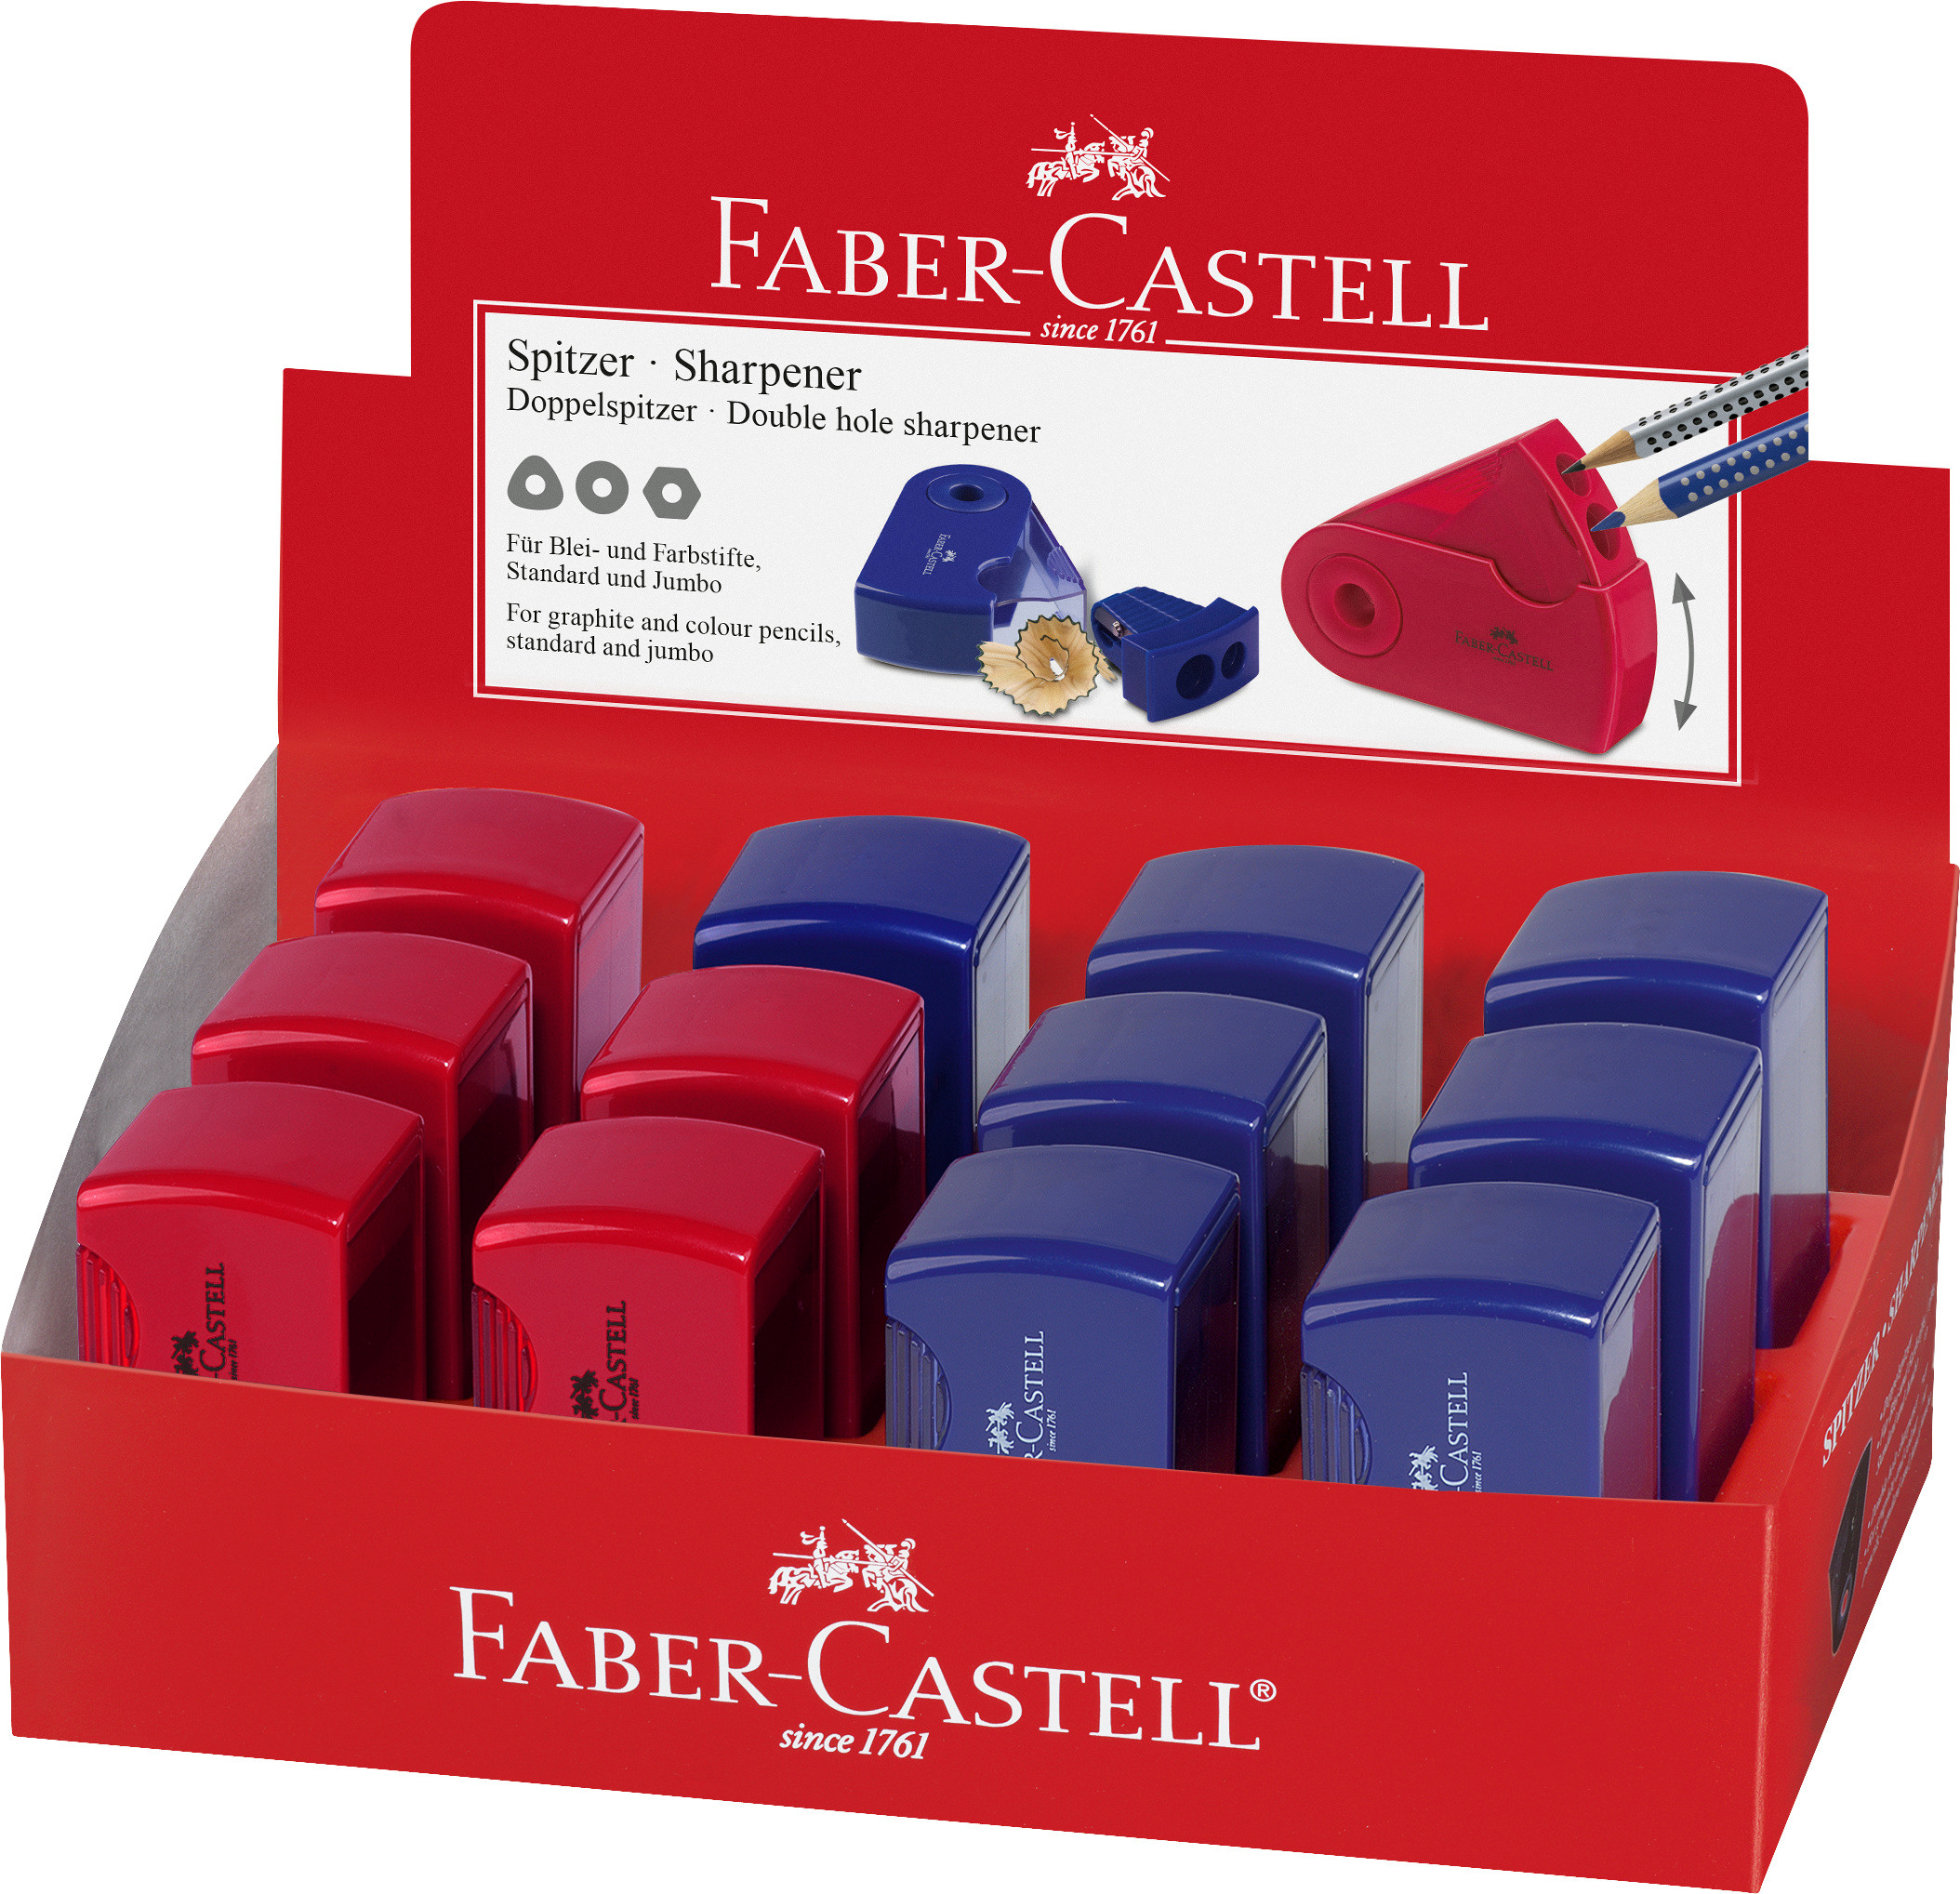 FABER-CASTELL Taille-crayon SLEEVE 182701 rouge/bleu